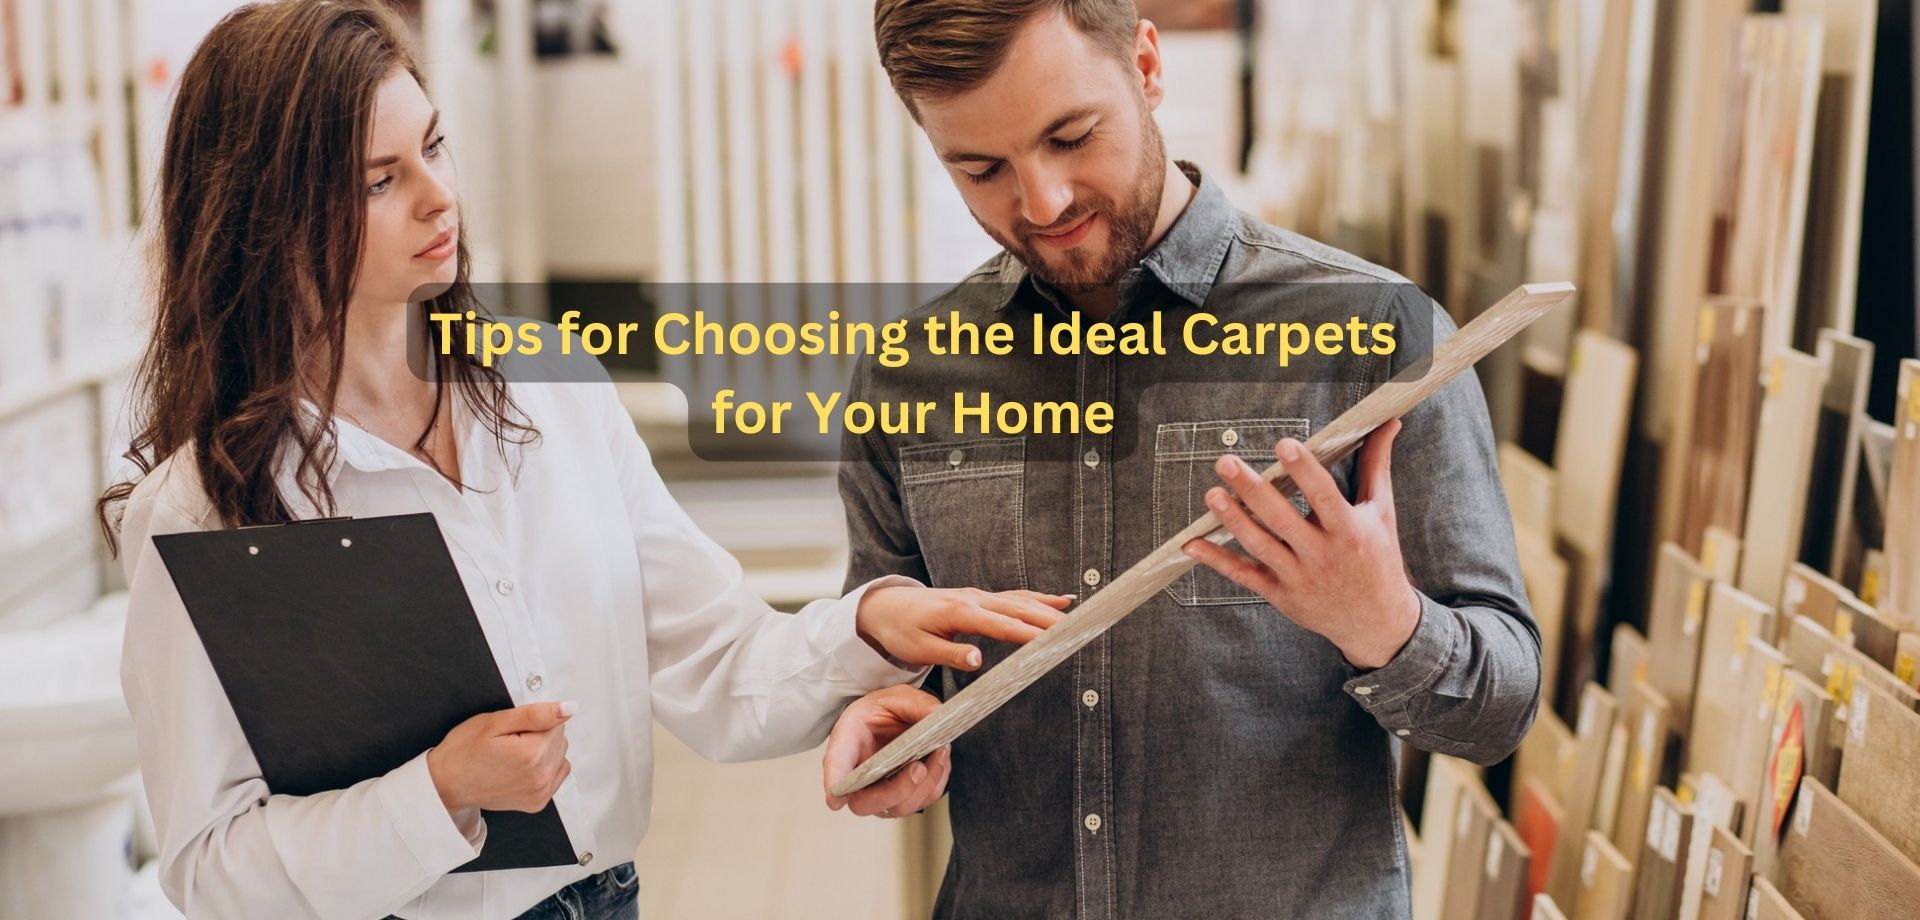 Tips for Choosing the Ideal Carpets for Your Home